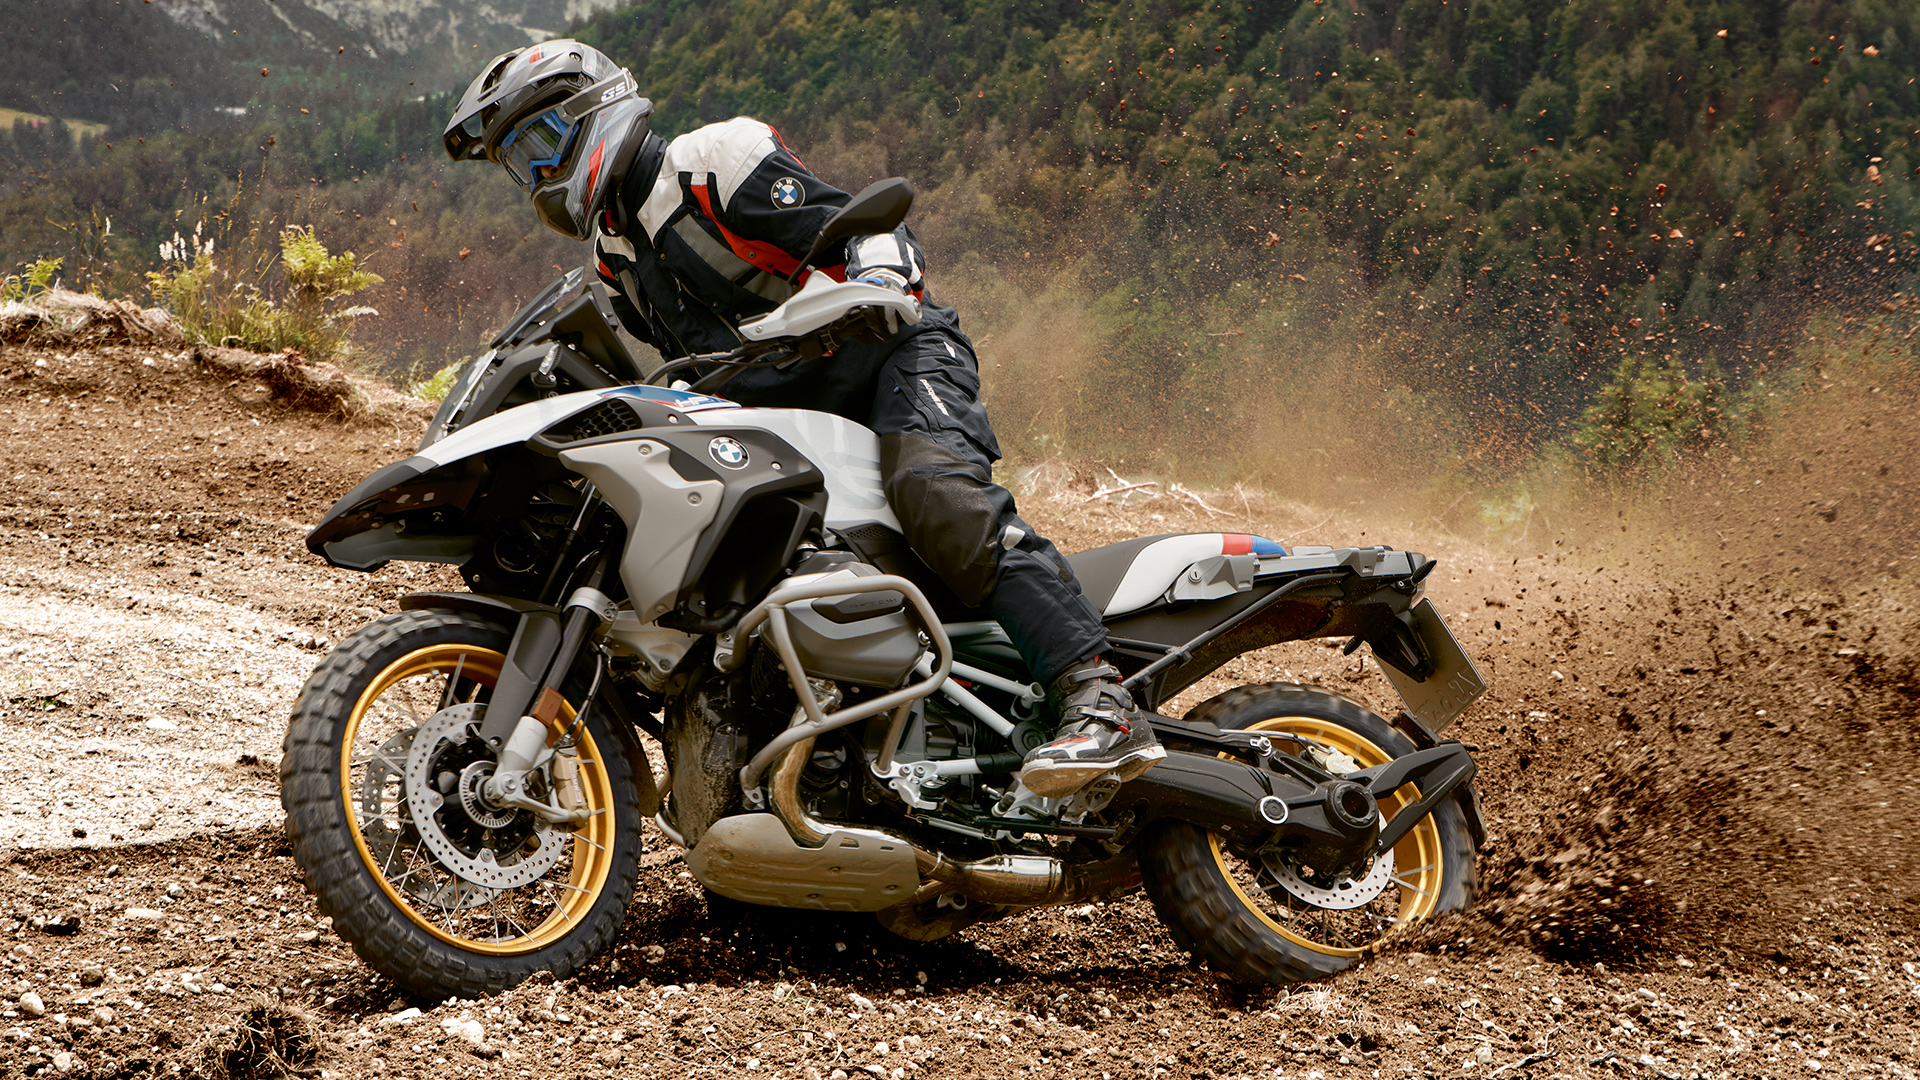 BMW R 1250 GS Motorcycle Prices, Full Technical Specifications